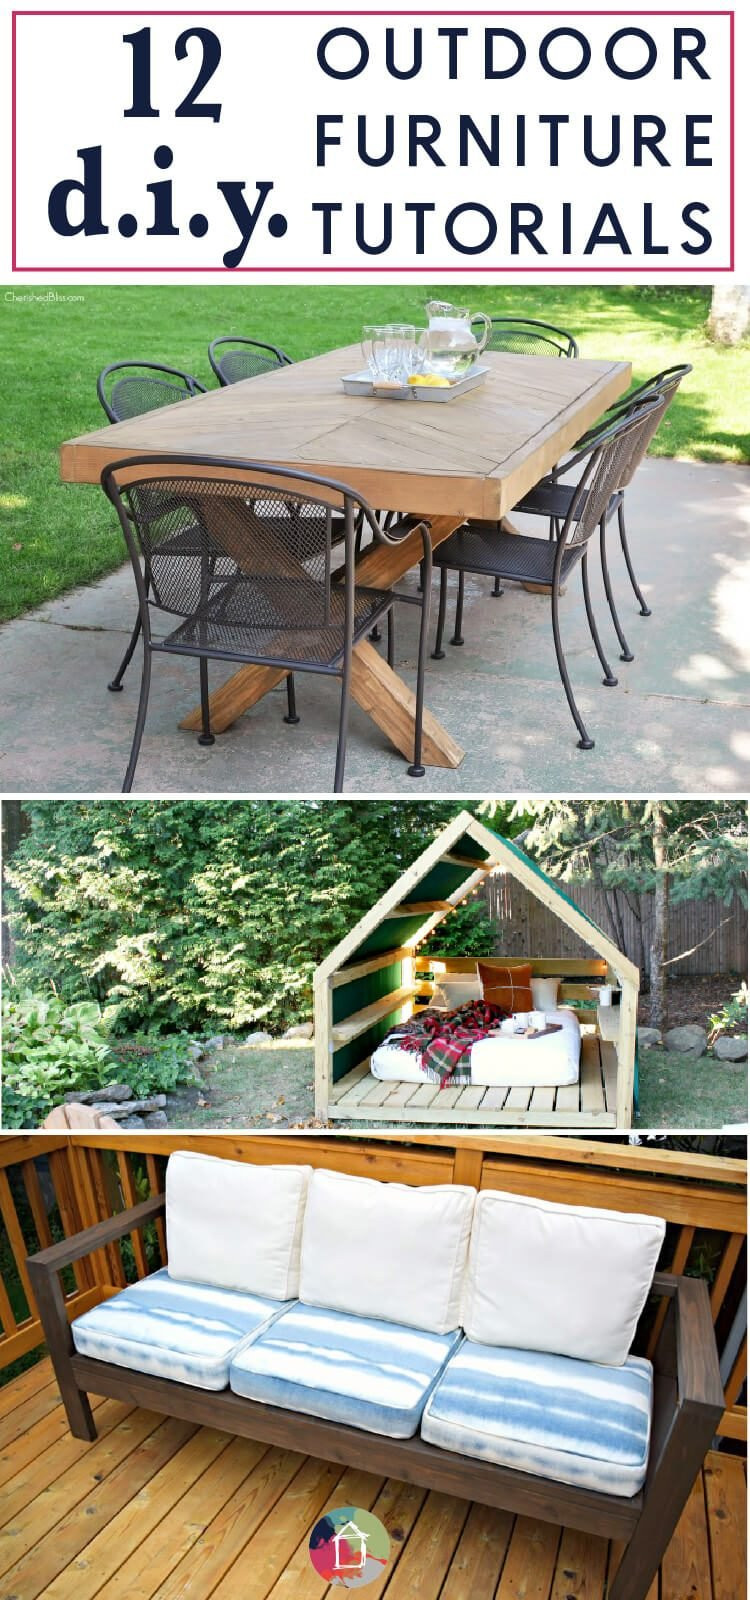 DIY Outdoor Chairs
 DIY Outdoor Furniture Creative & Affordable Ideas